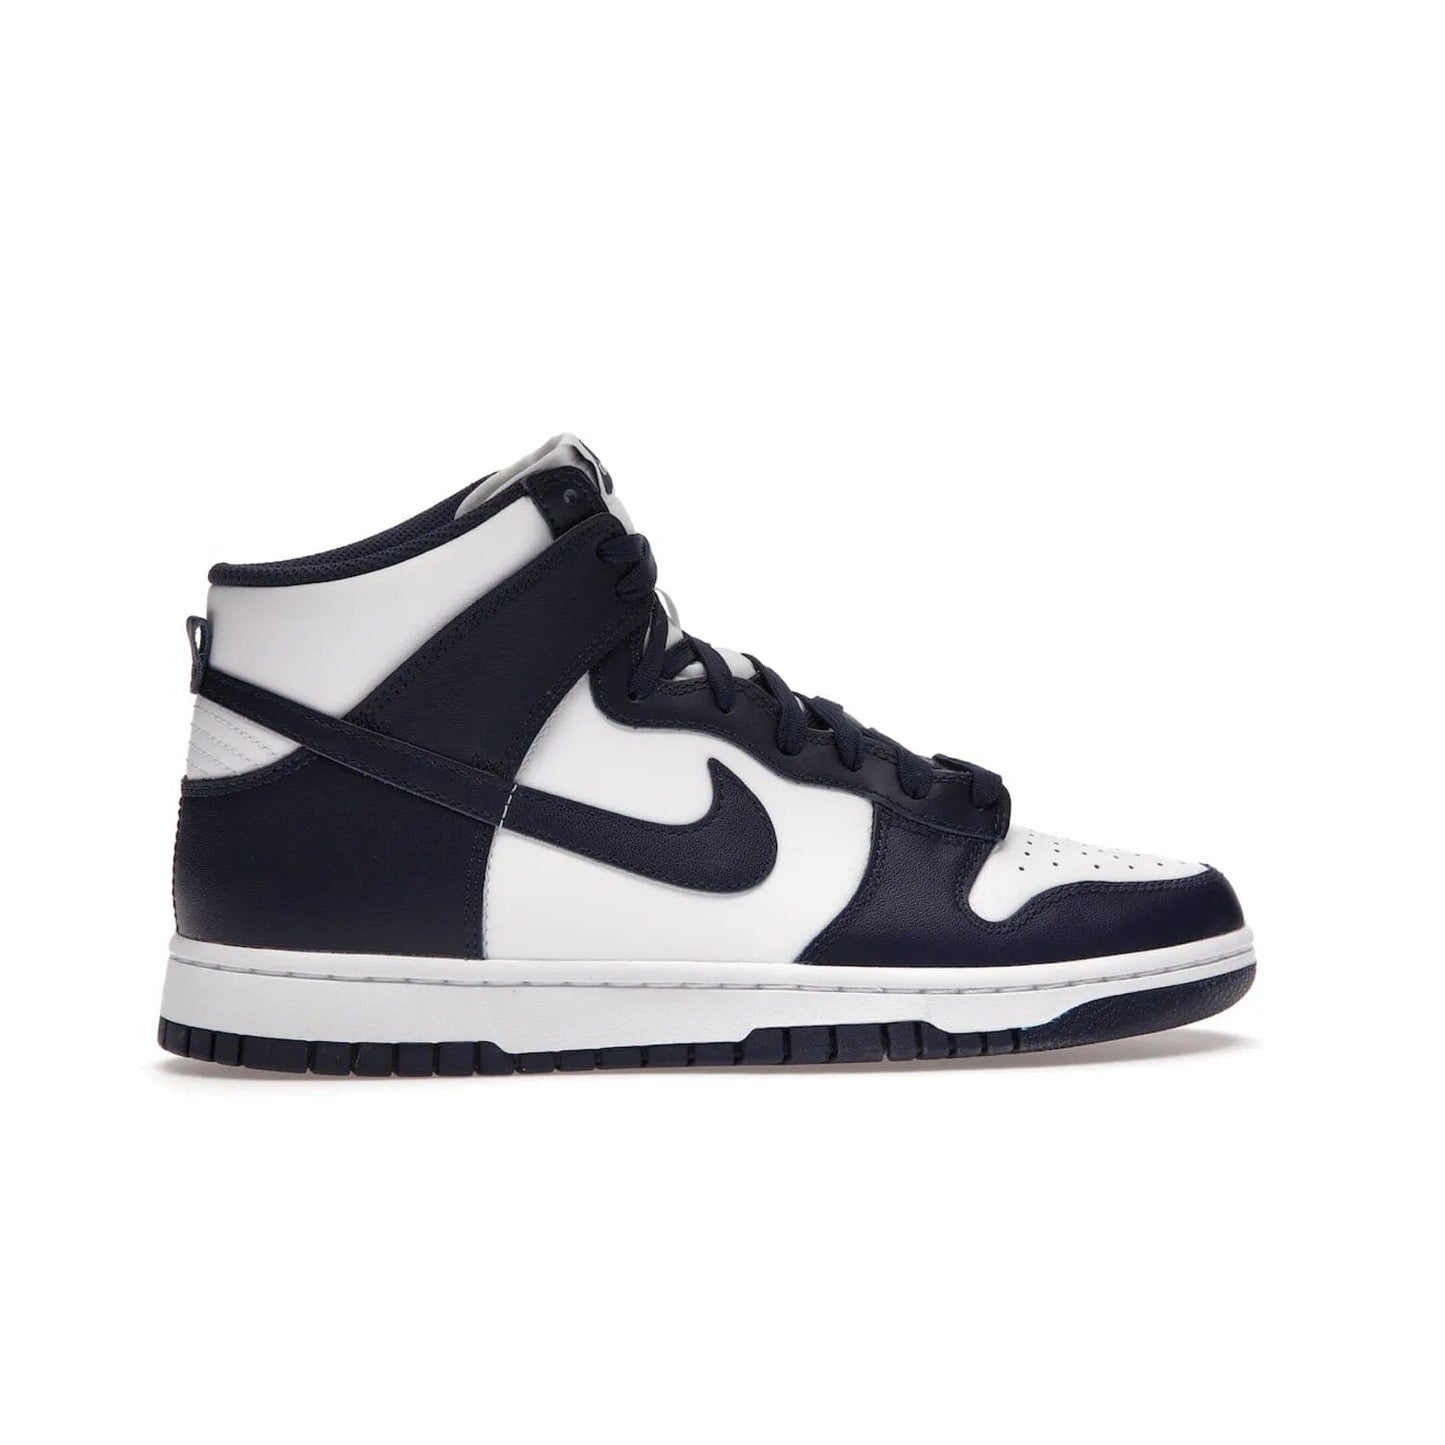 Nike Dunk High Championship Navy - Image 36 - Only at www.BallersClubKickz.com - Classic athletic style meets striking color-blocking on the Nike Dunk High Championship Navy. A white leather upper with Championship Navy overlays creates a retro look with a woven tongue label and sole. Unleash your inner champion with the Nike Dunk High Championship Navy.